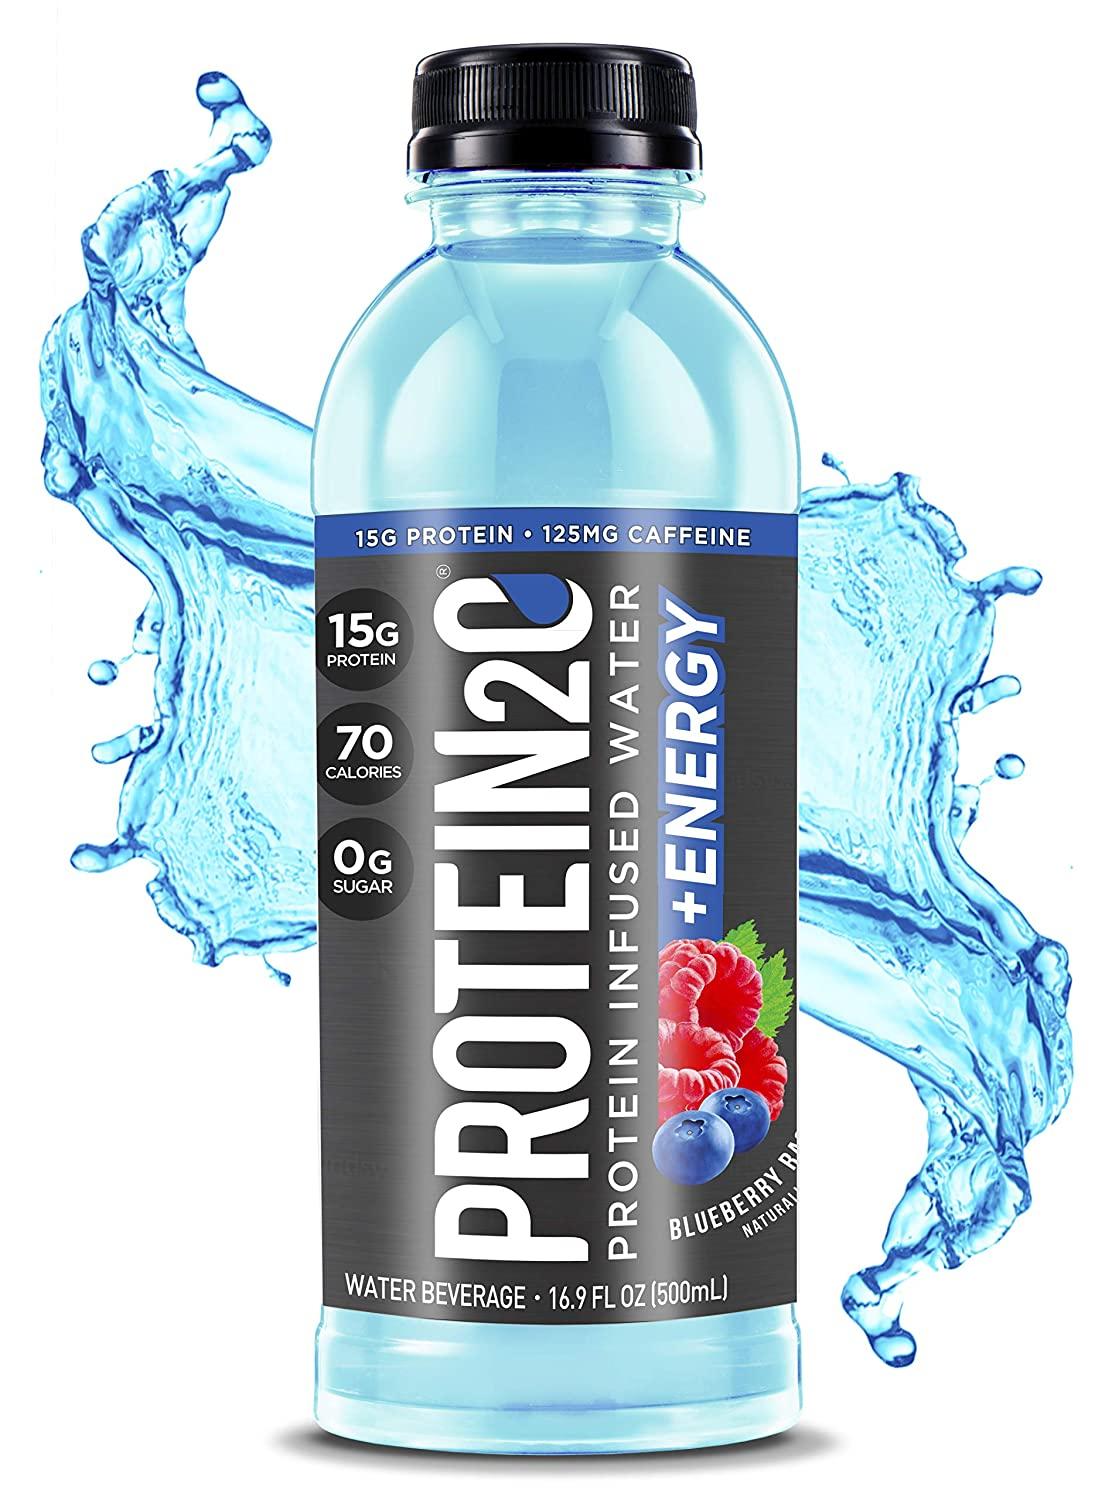 Protein2o 15g Whey Protein Infused Water Plus Energy, Variety Pack, 16.9 oz  Bottle (12 Count) : Everything Else 